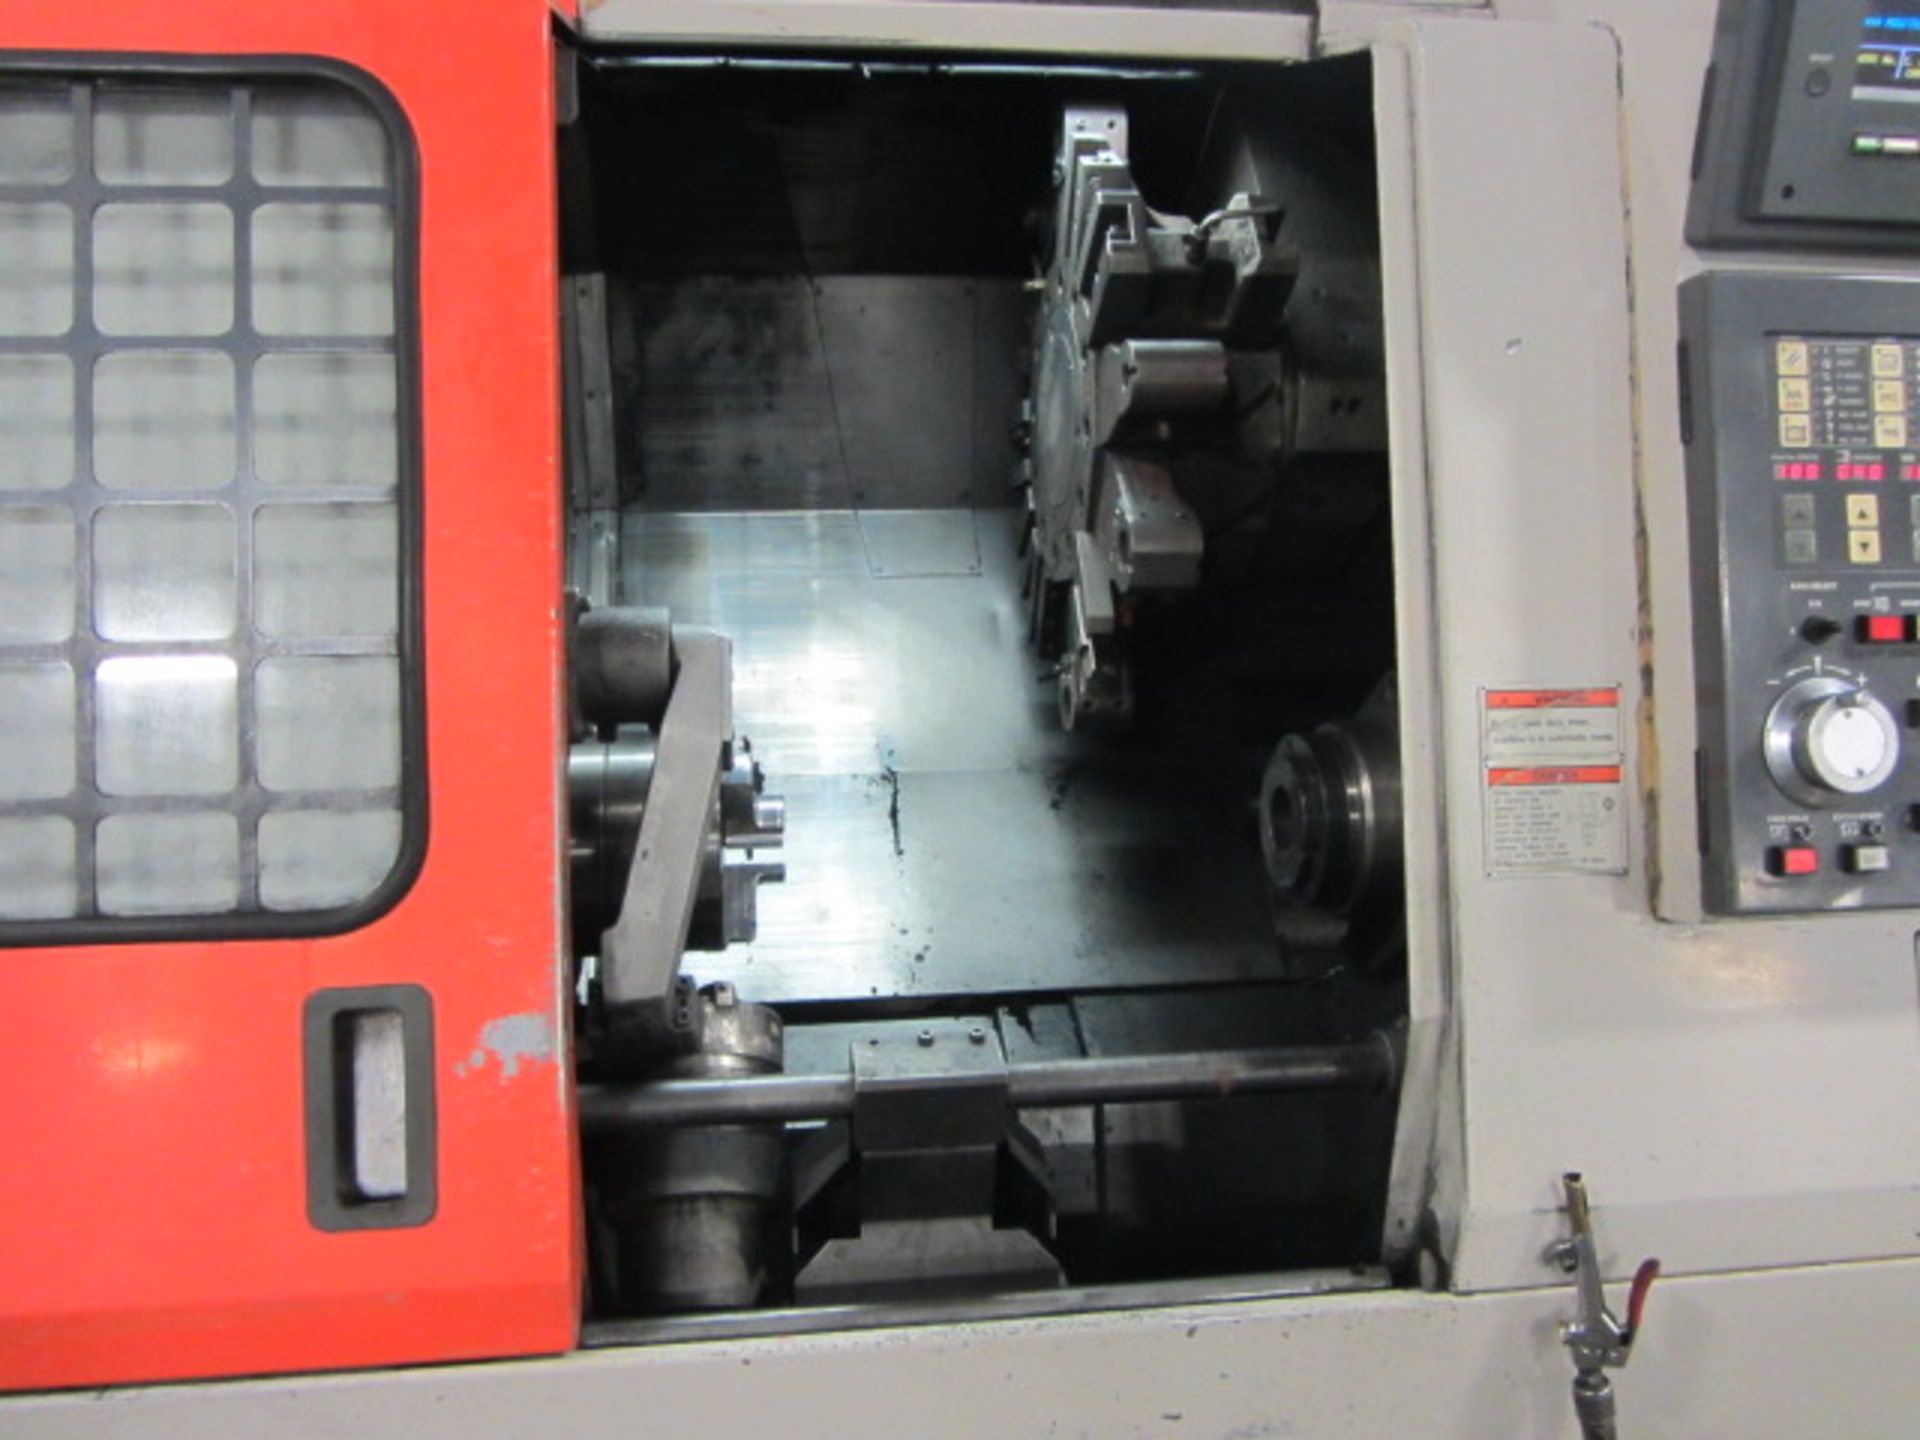 Mazak Super Quick Turn 10MS CNC Turning Center with Sub-Spindle, Milling, 6'' 3-Jaw Power Chuck, - Image 3 of 8